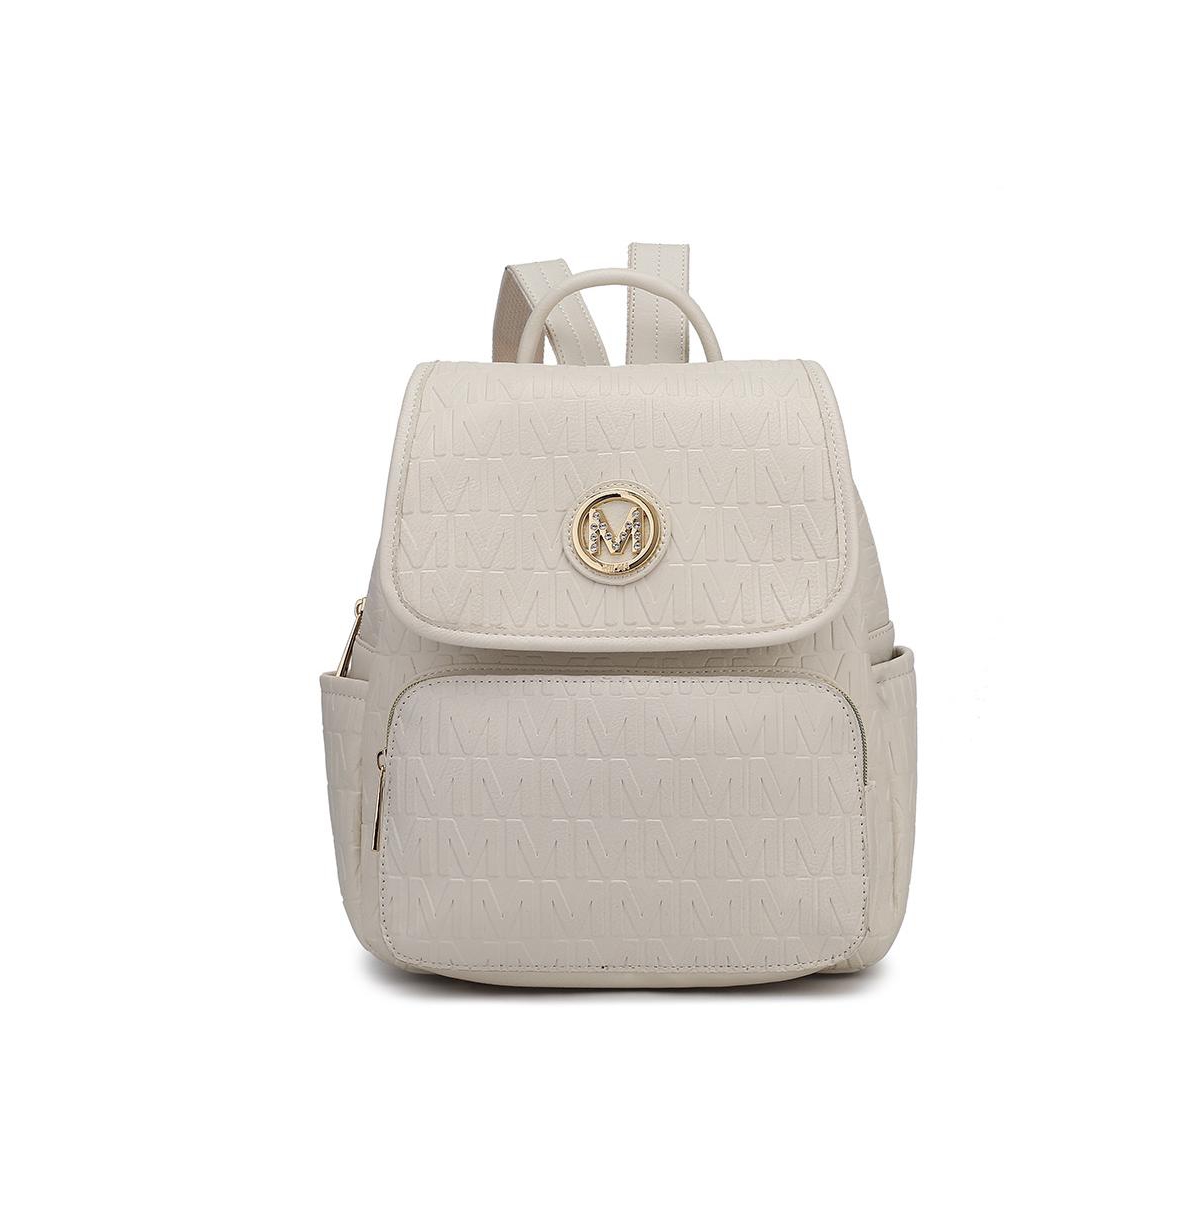 Samantha Backpack by Mia K. - Taupe